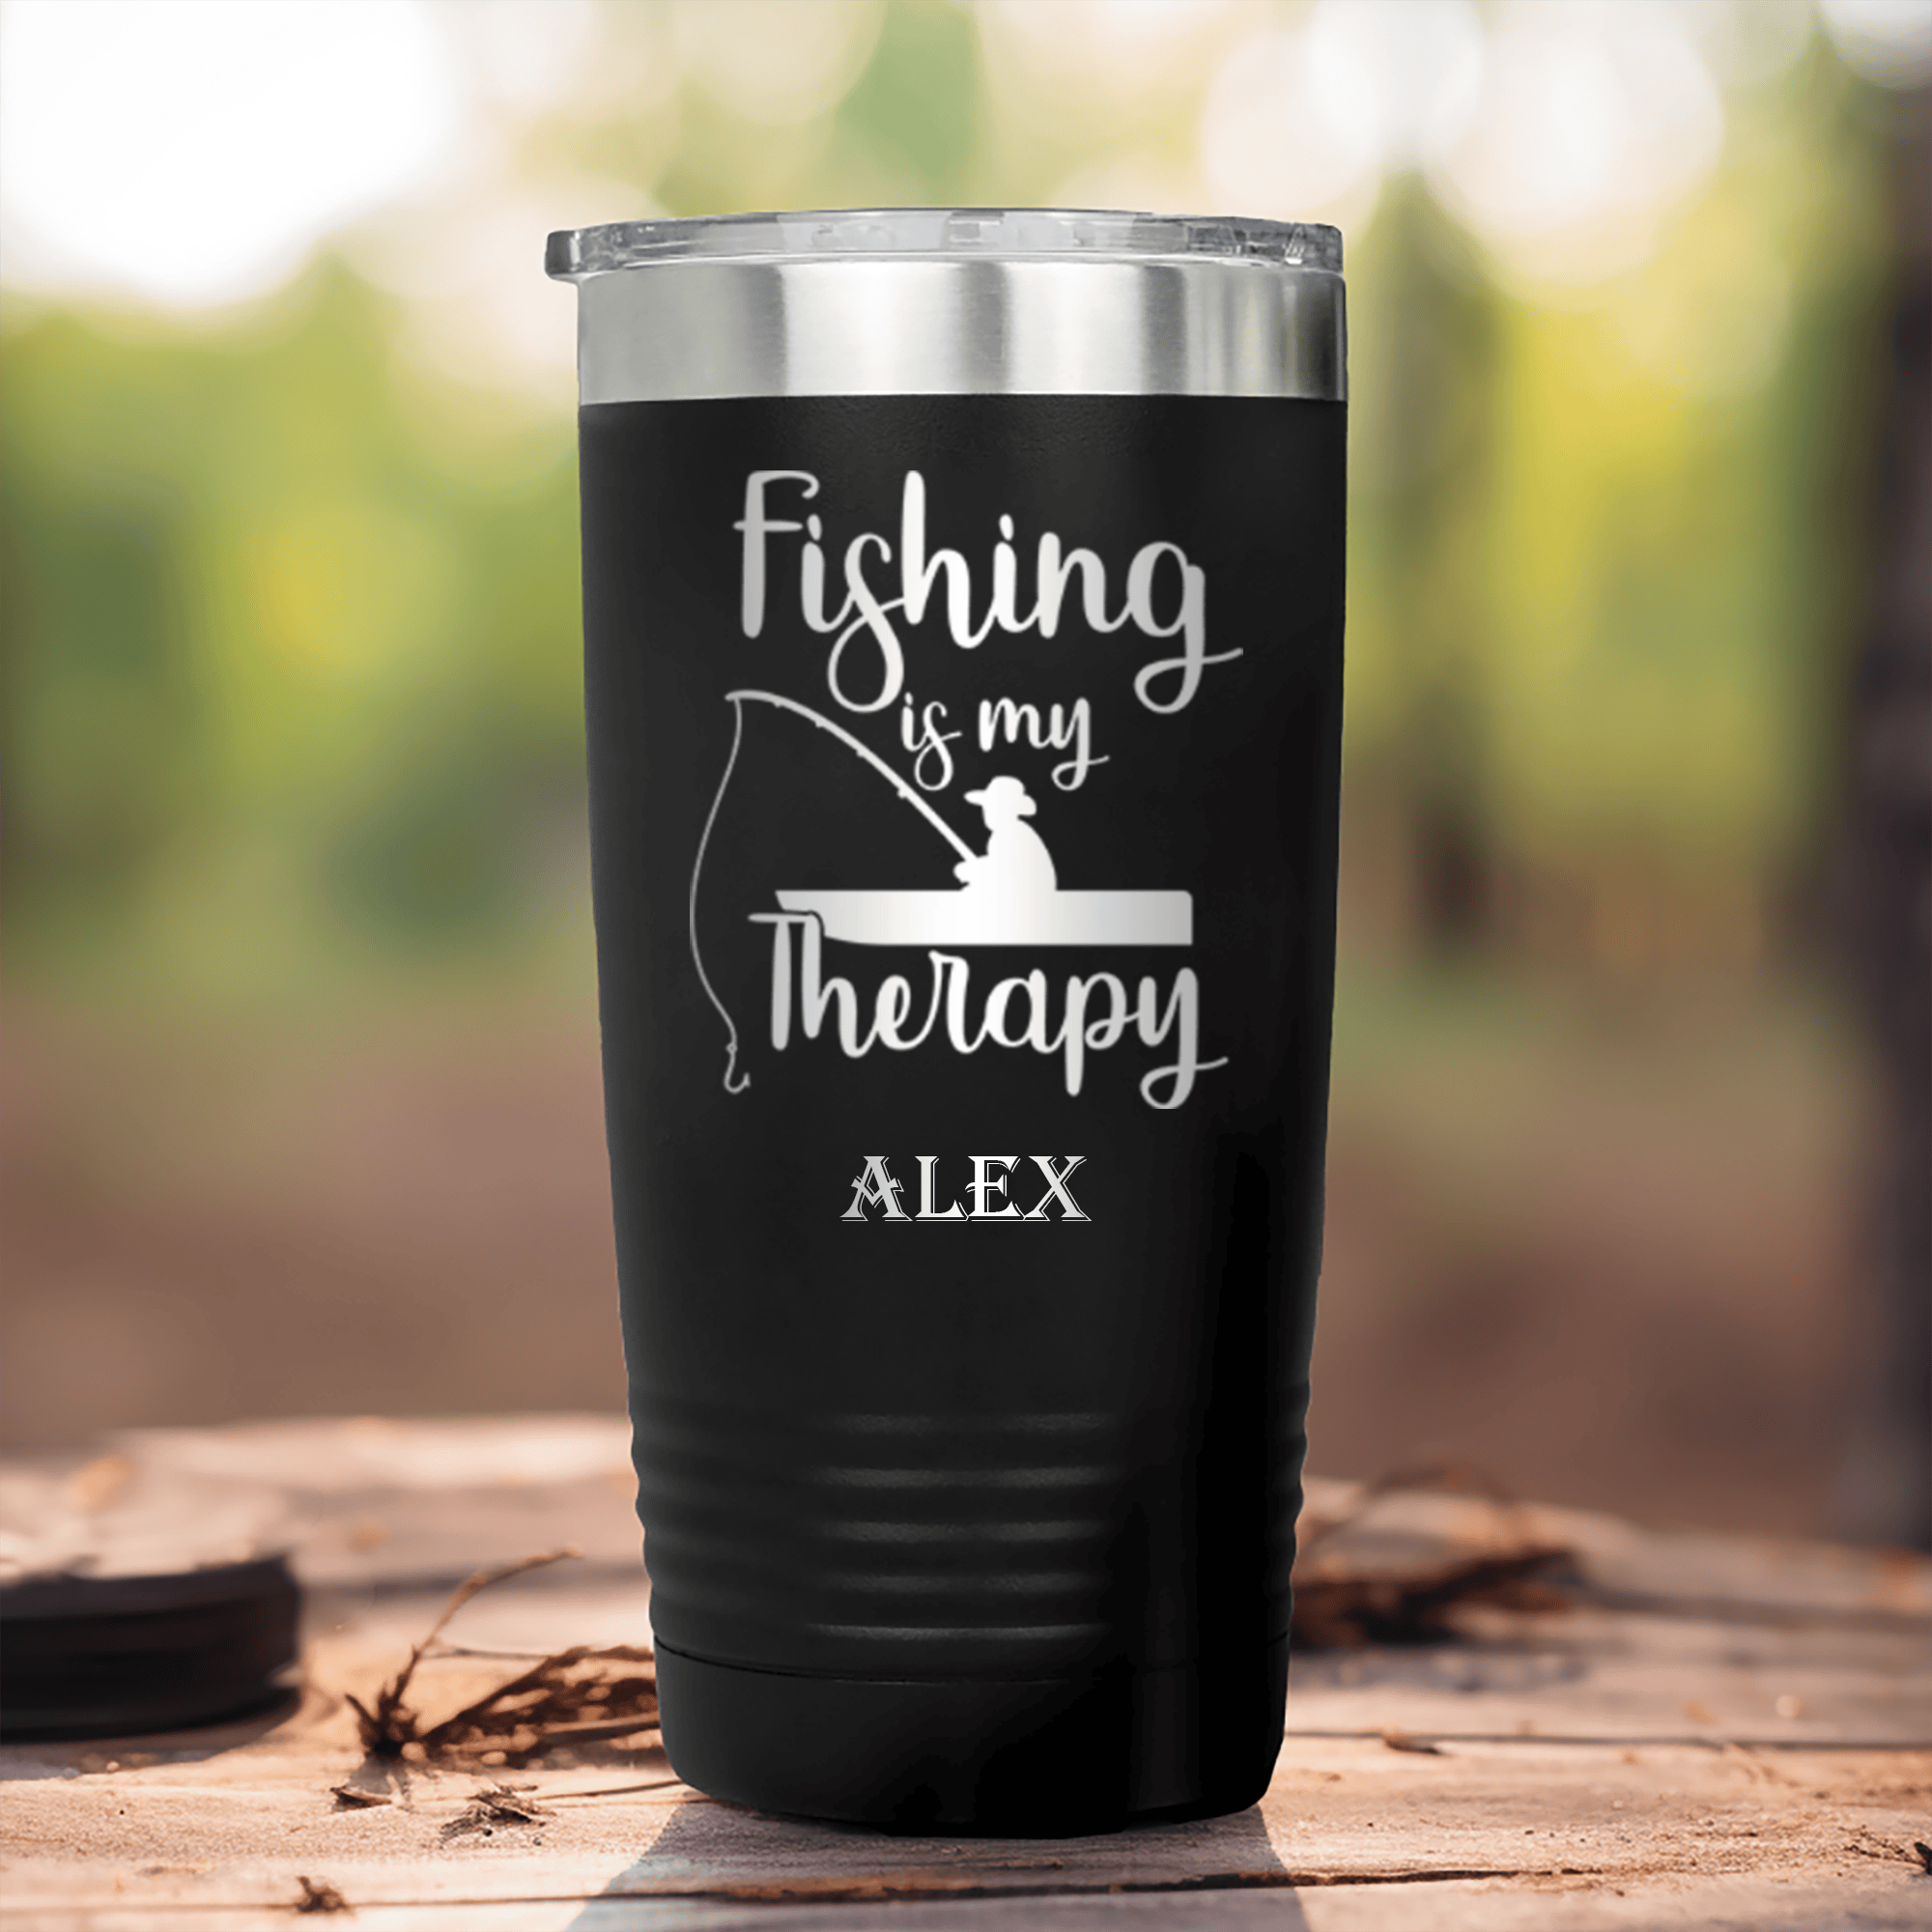 Black Fishing Tumbler With Fishing Therapy Design